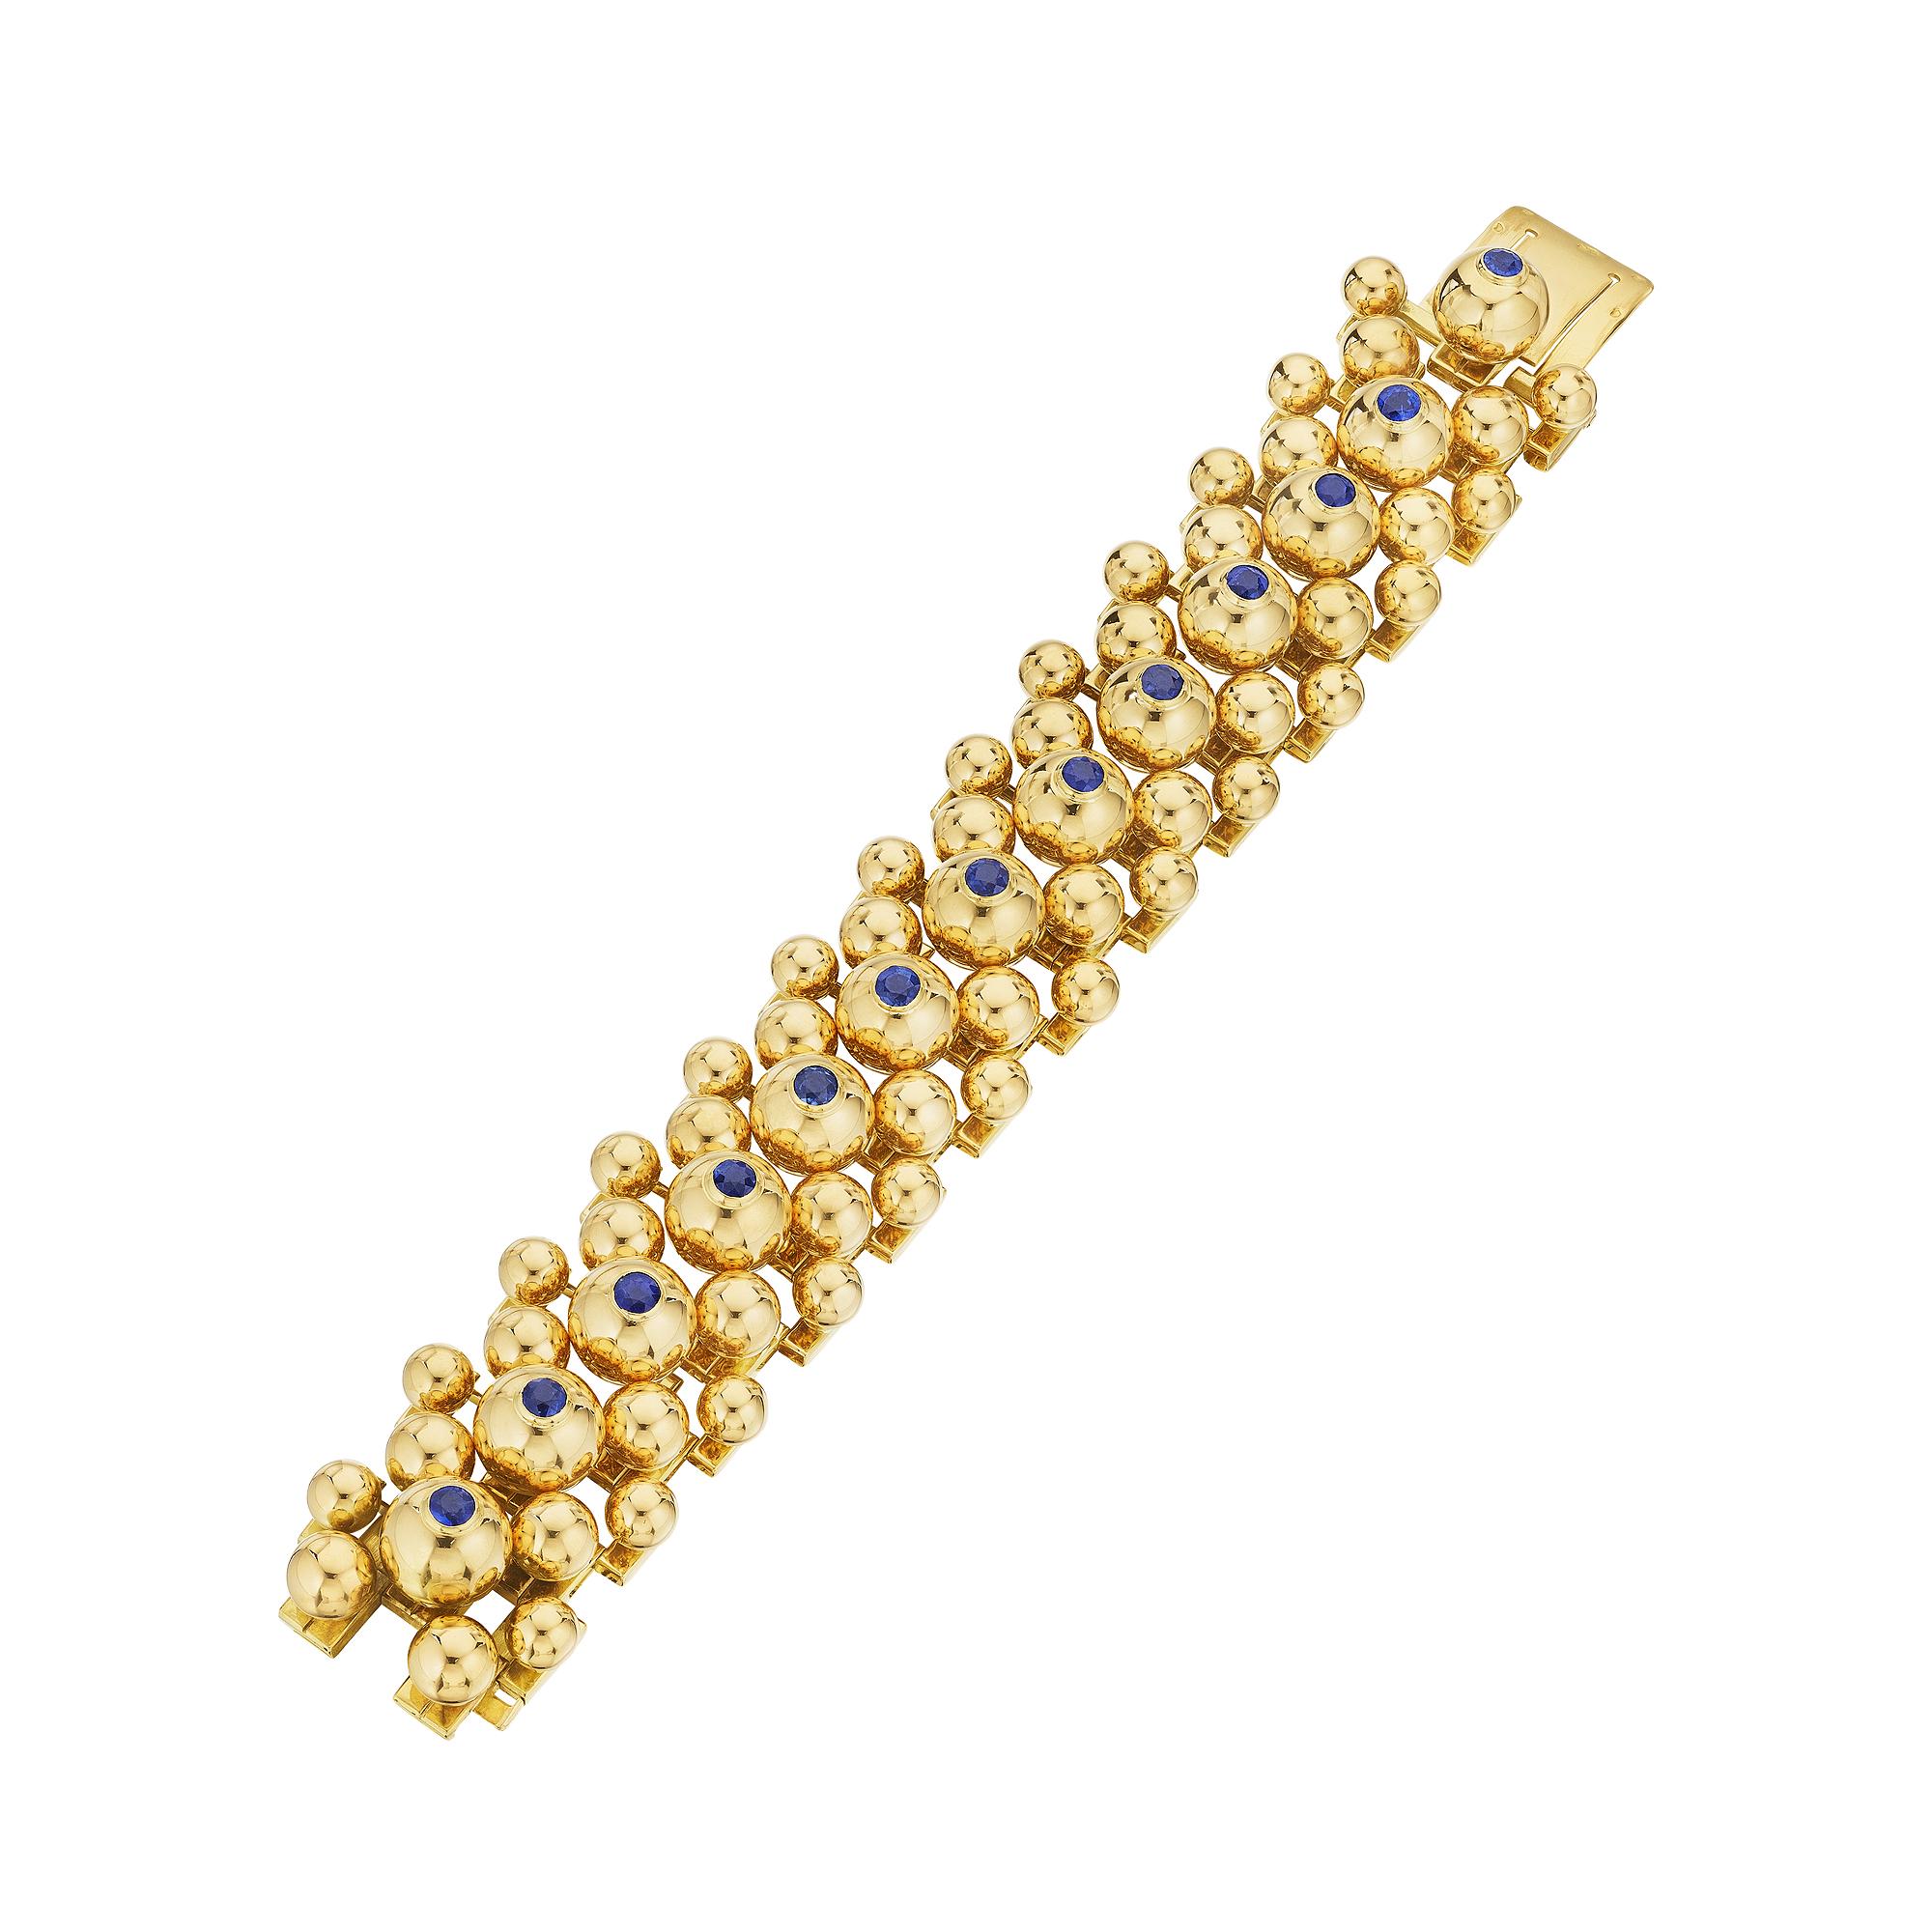 No one will ever dare to burst your bubble when wearing this rare Cartier Paris mid-century sapphire 18 karat yellow gold bracelet.  Varying sizes of gold spheres, with the largest being topped with vivid round brilliant cut sapphires, are cleverly